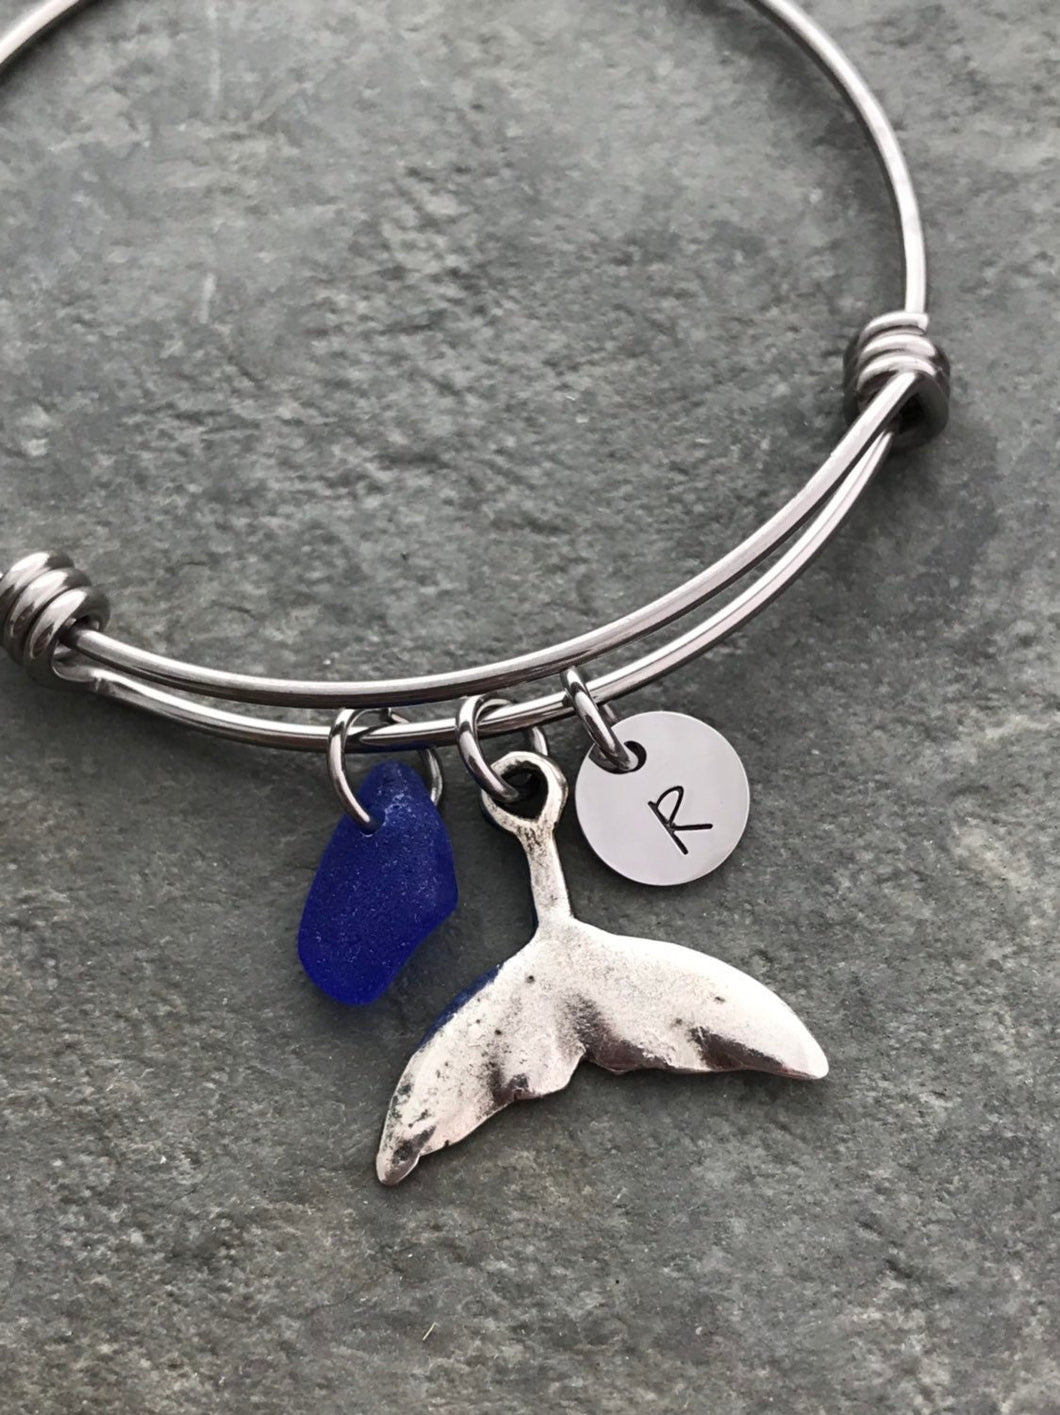 Whale tail bracelet, stainless steel adjustable bangle with genuine sea glass, hand stamped initial disc Beach glass jewelry whale tail